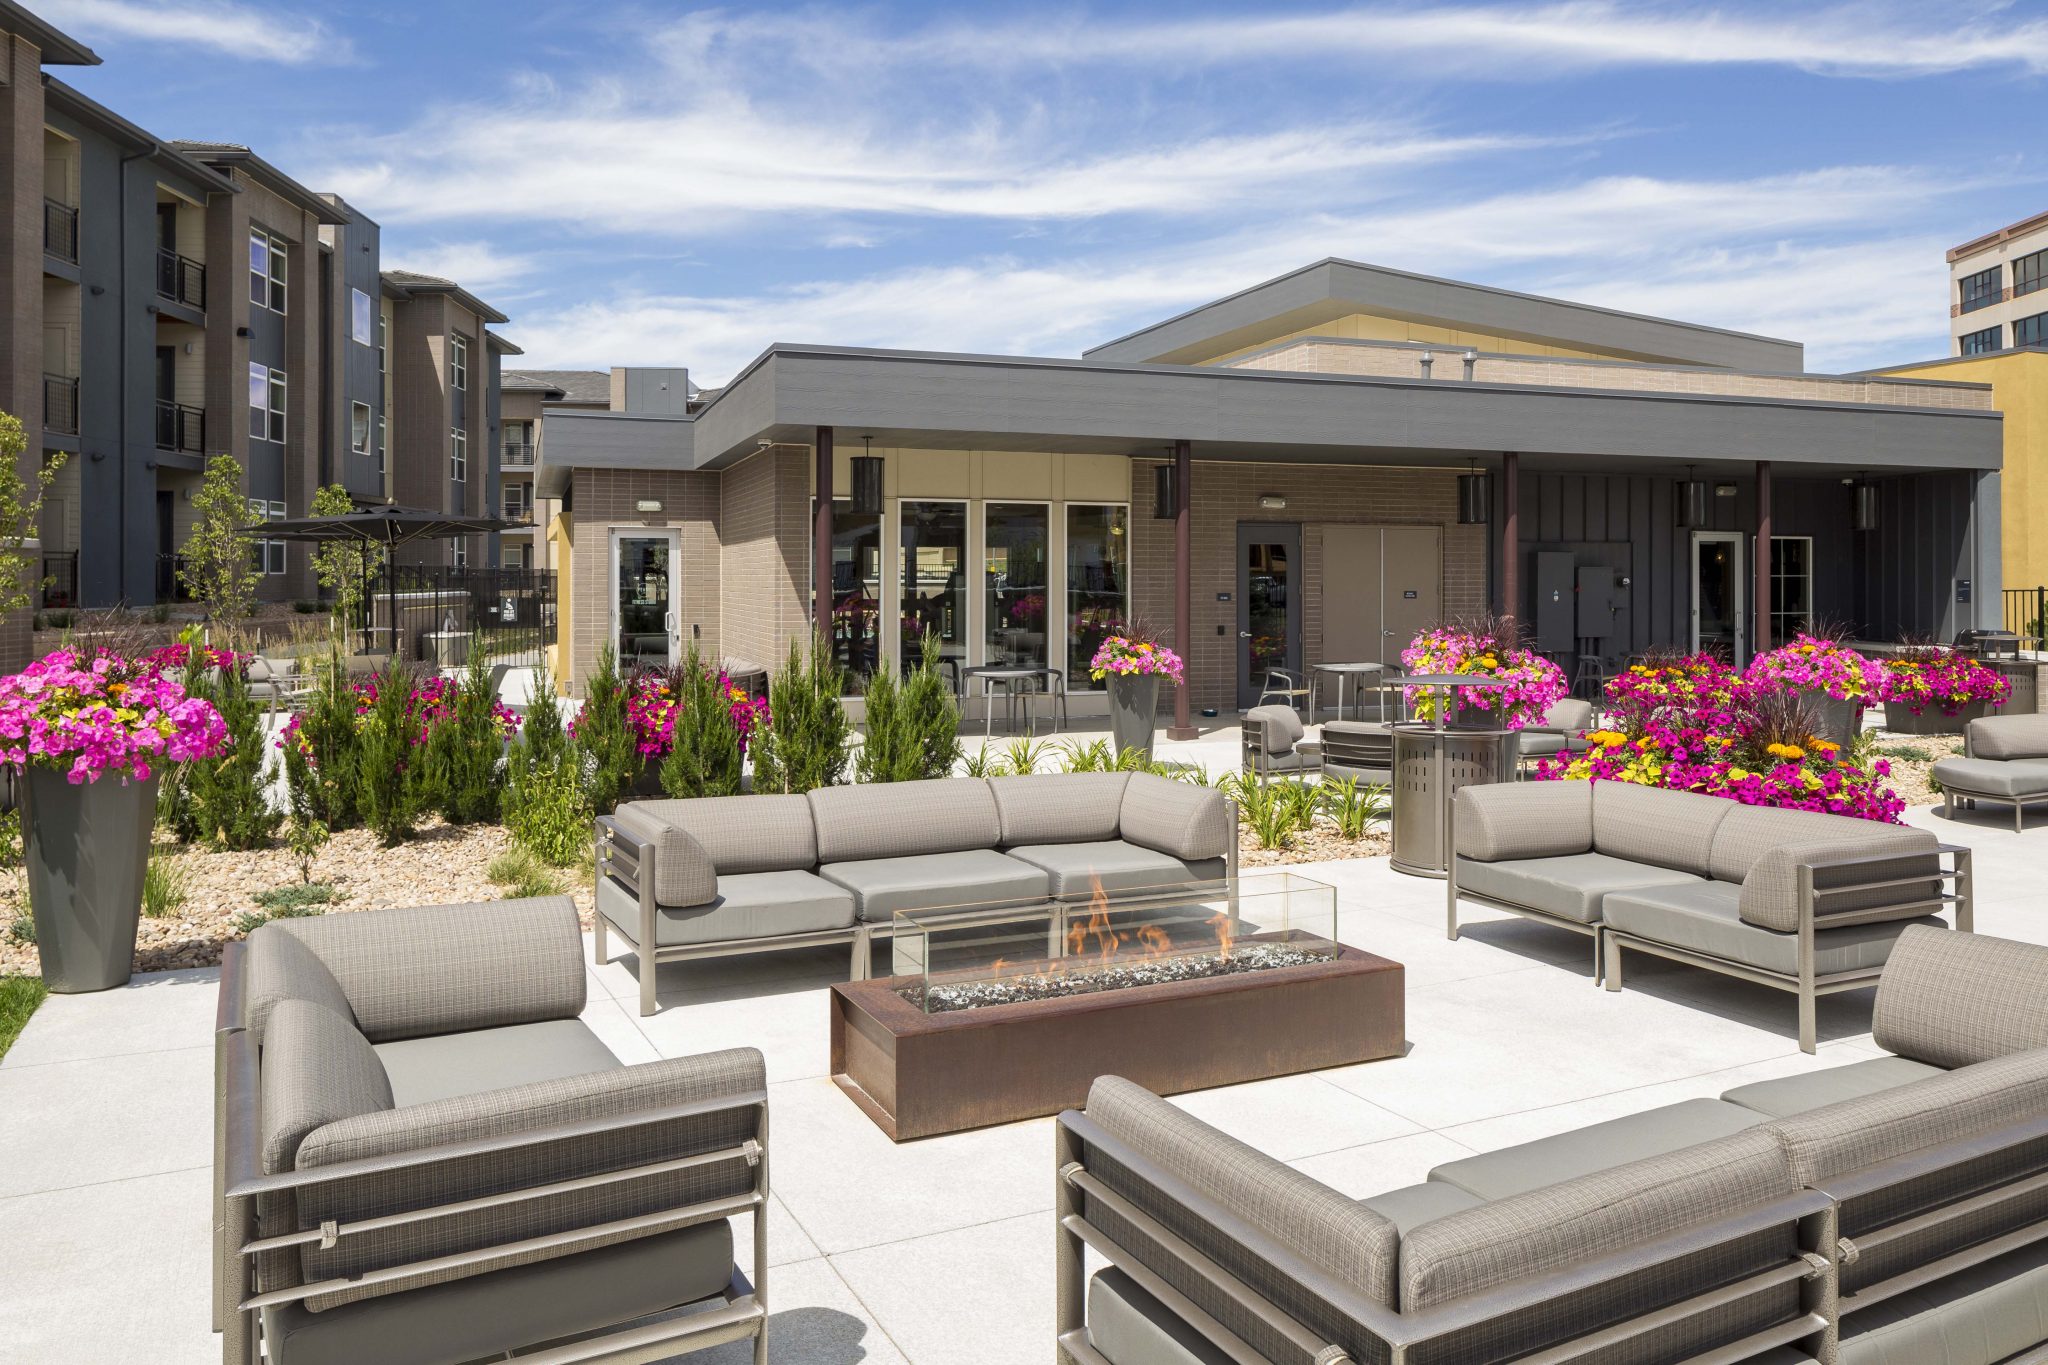 Exterior of glass-walled fire pit and couches with apartment buildings in the background